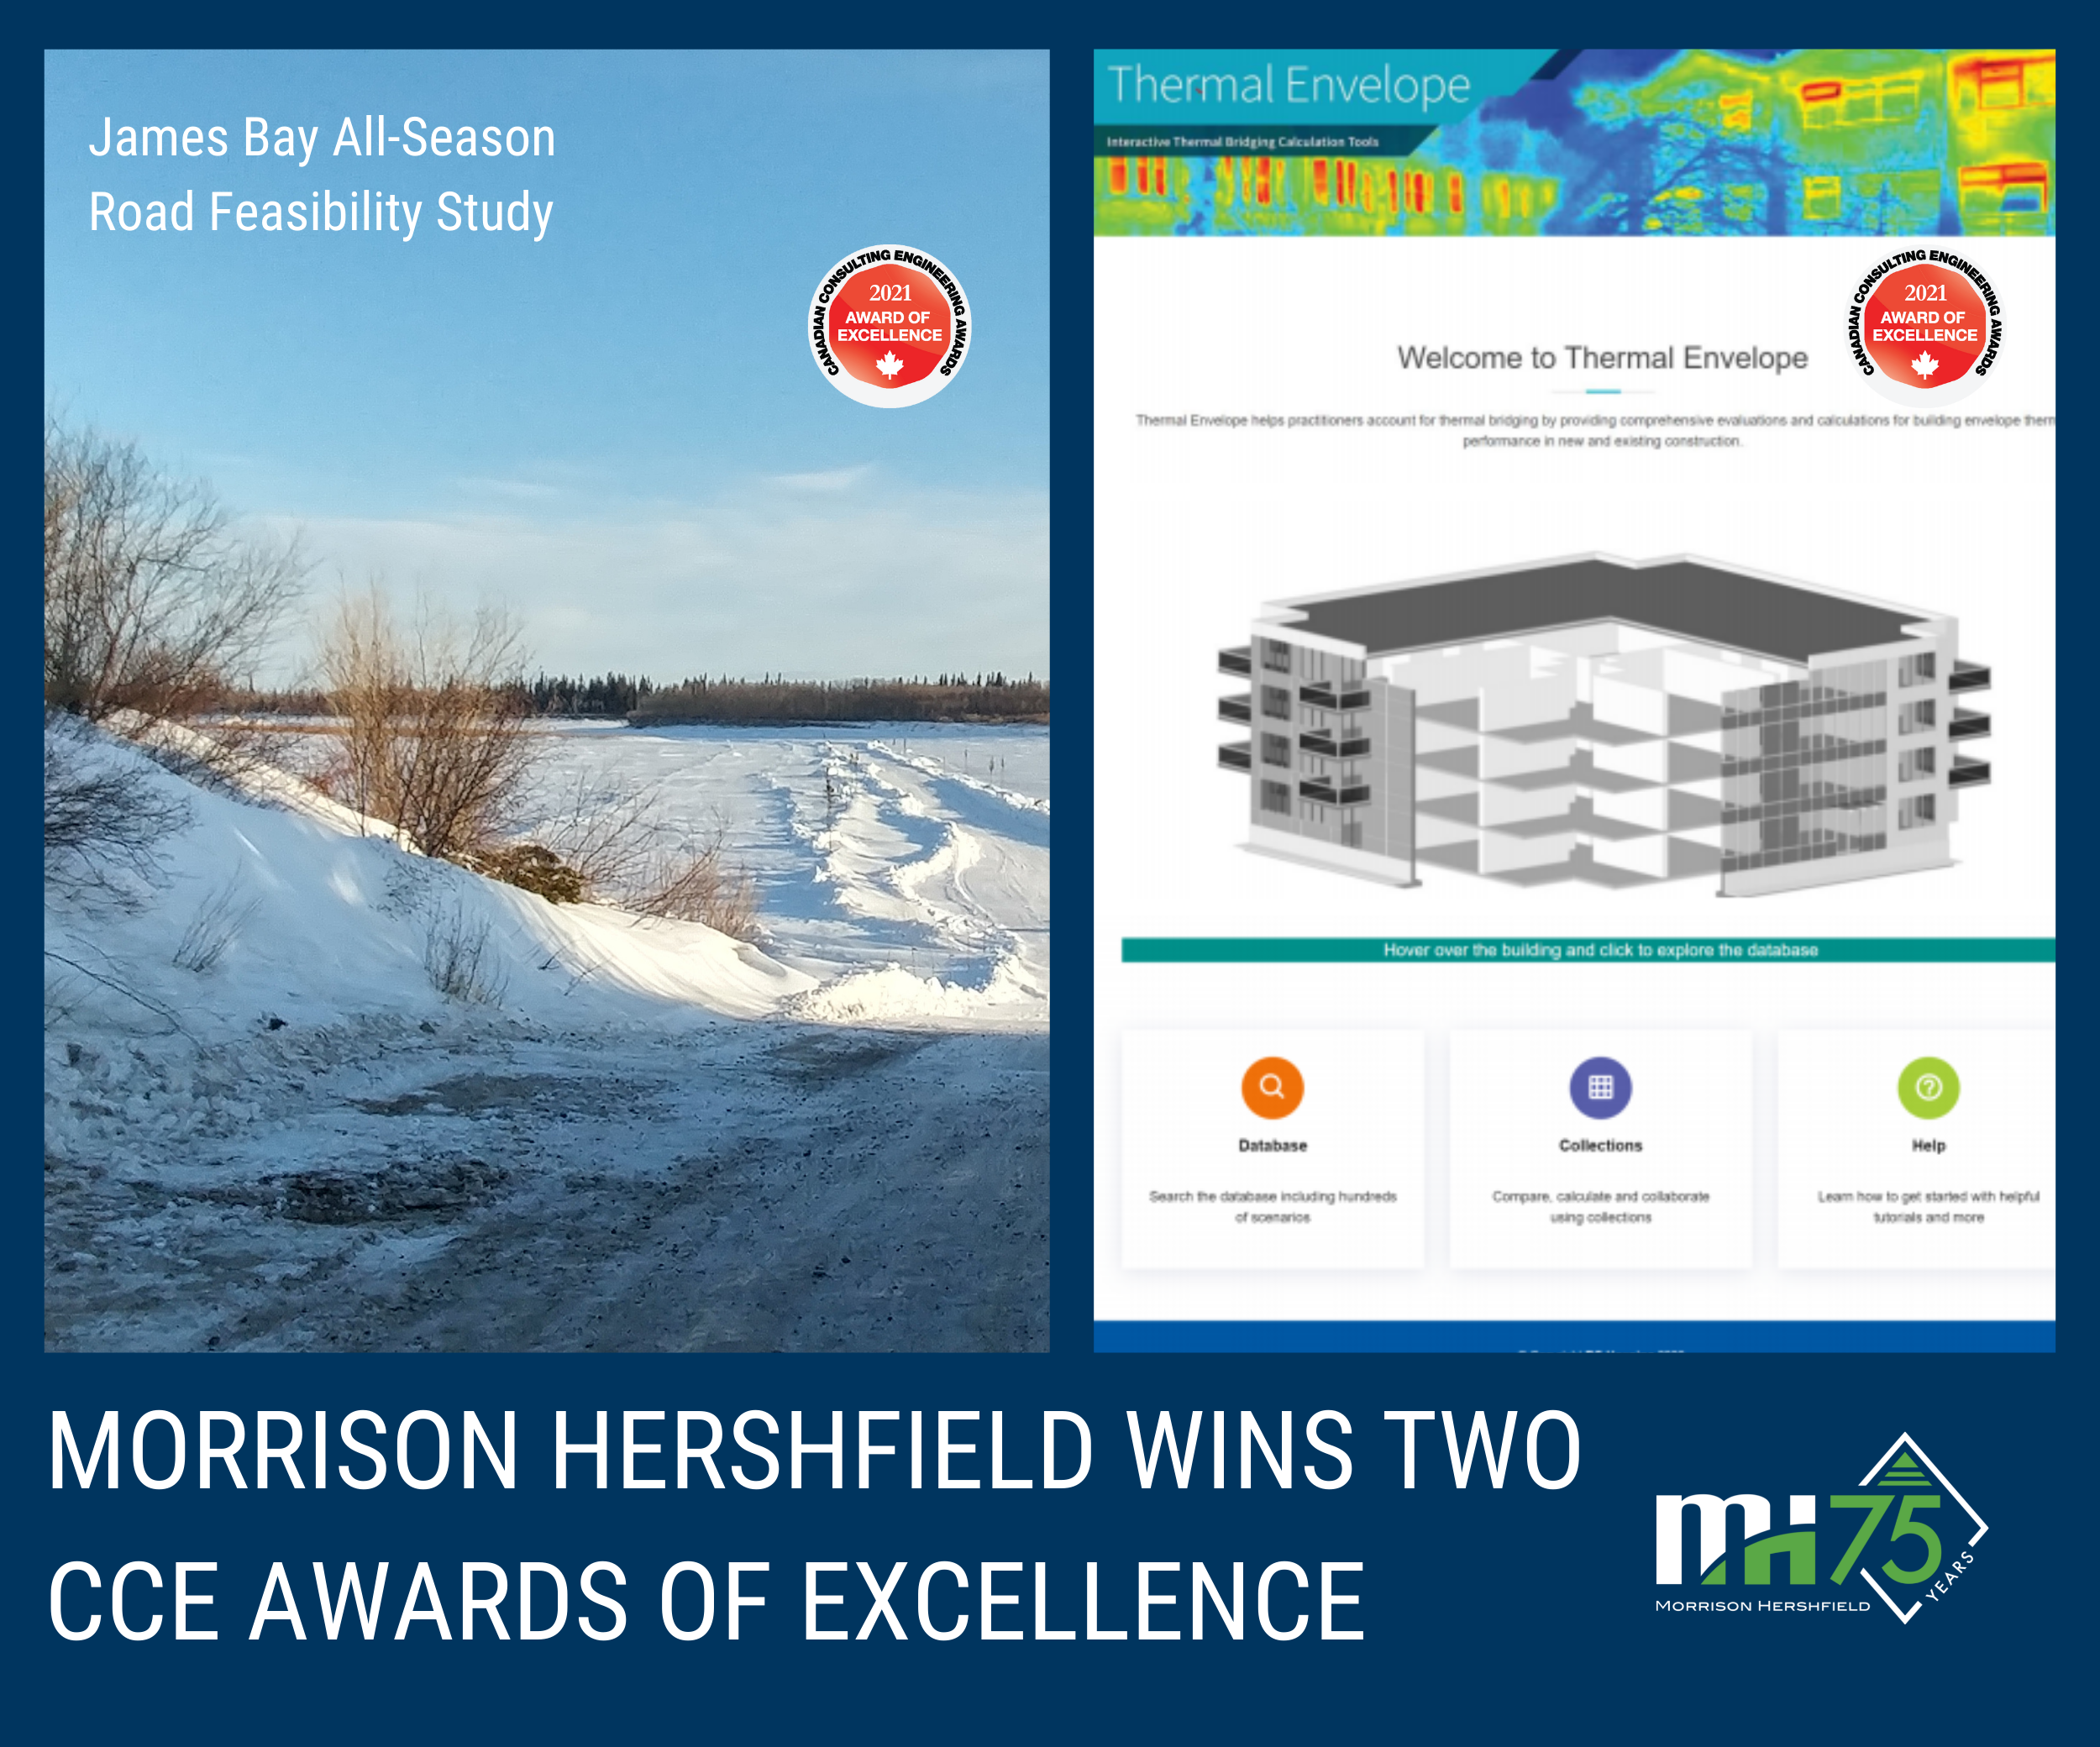 Morrison Hershfield Wins Two CCE Awards of Excellence